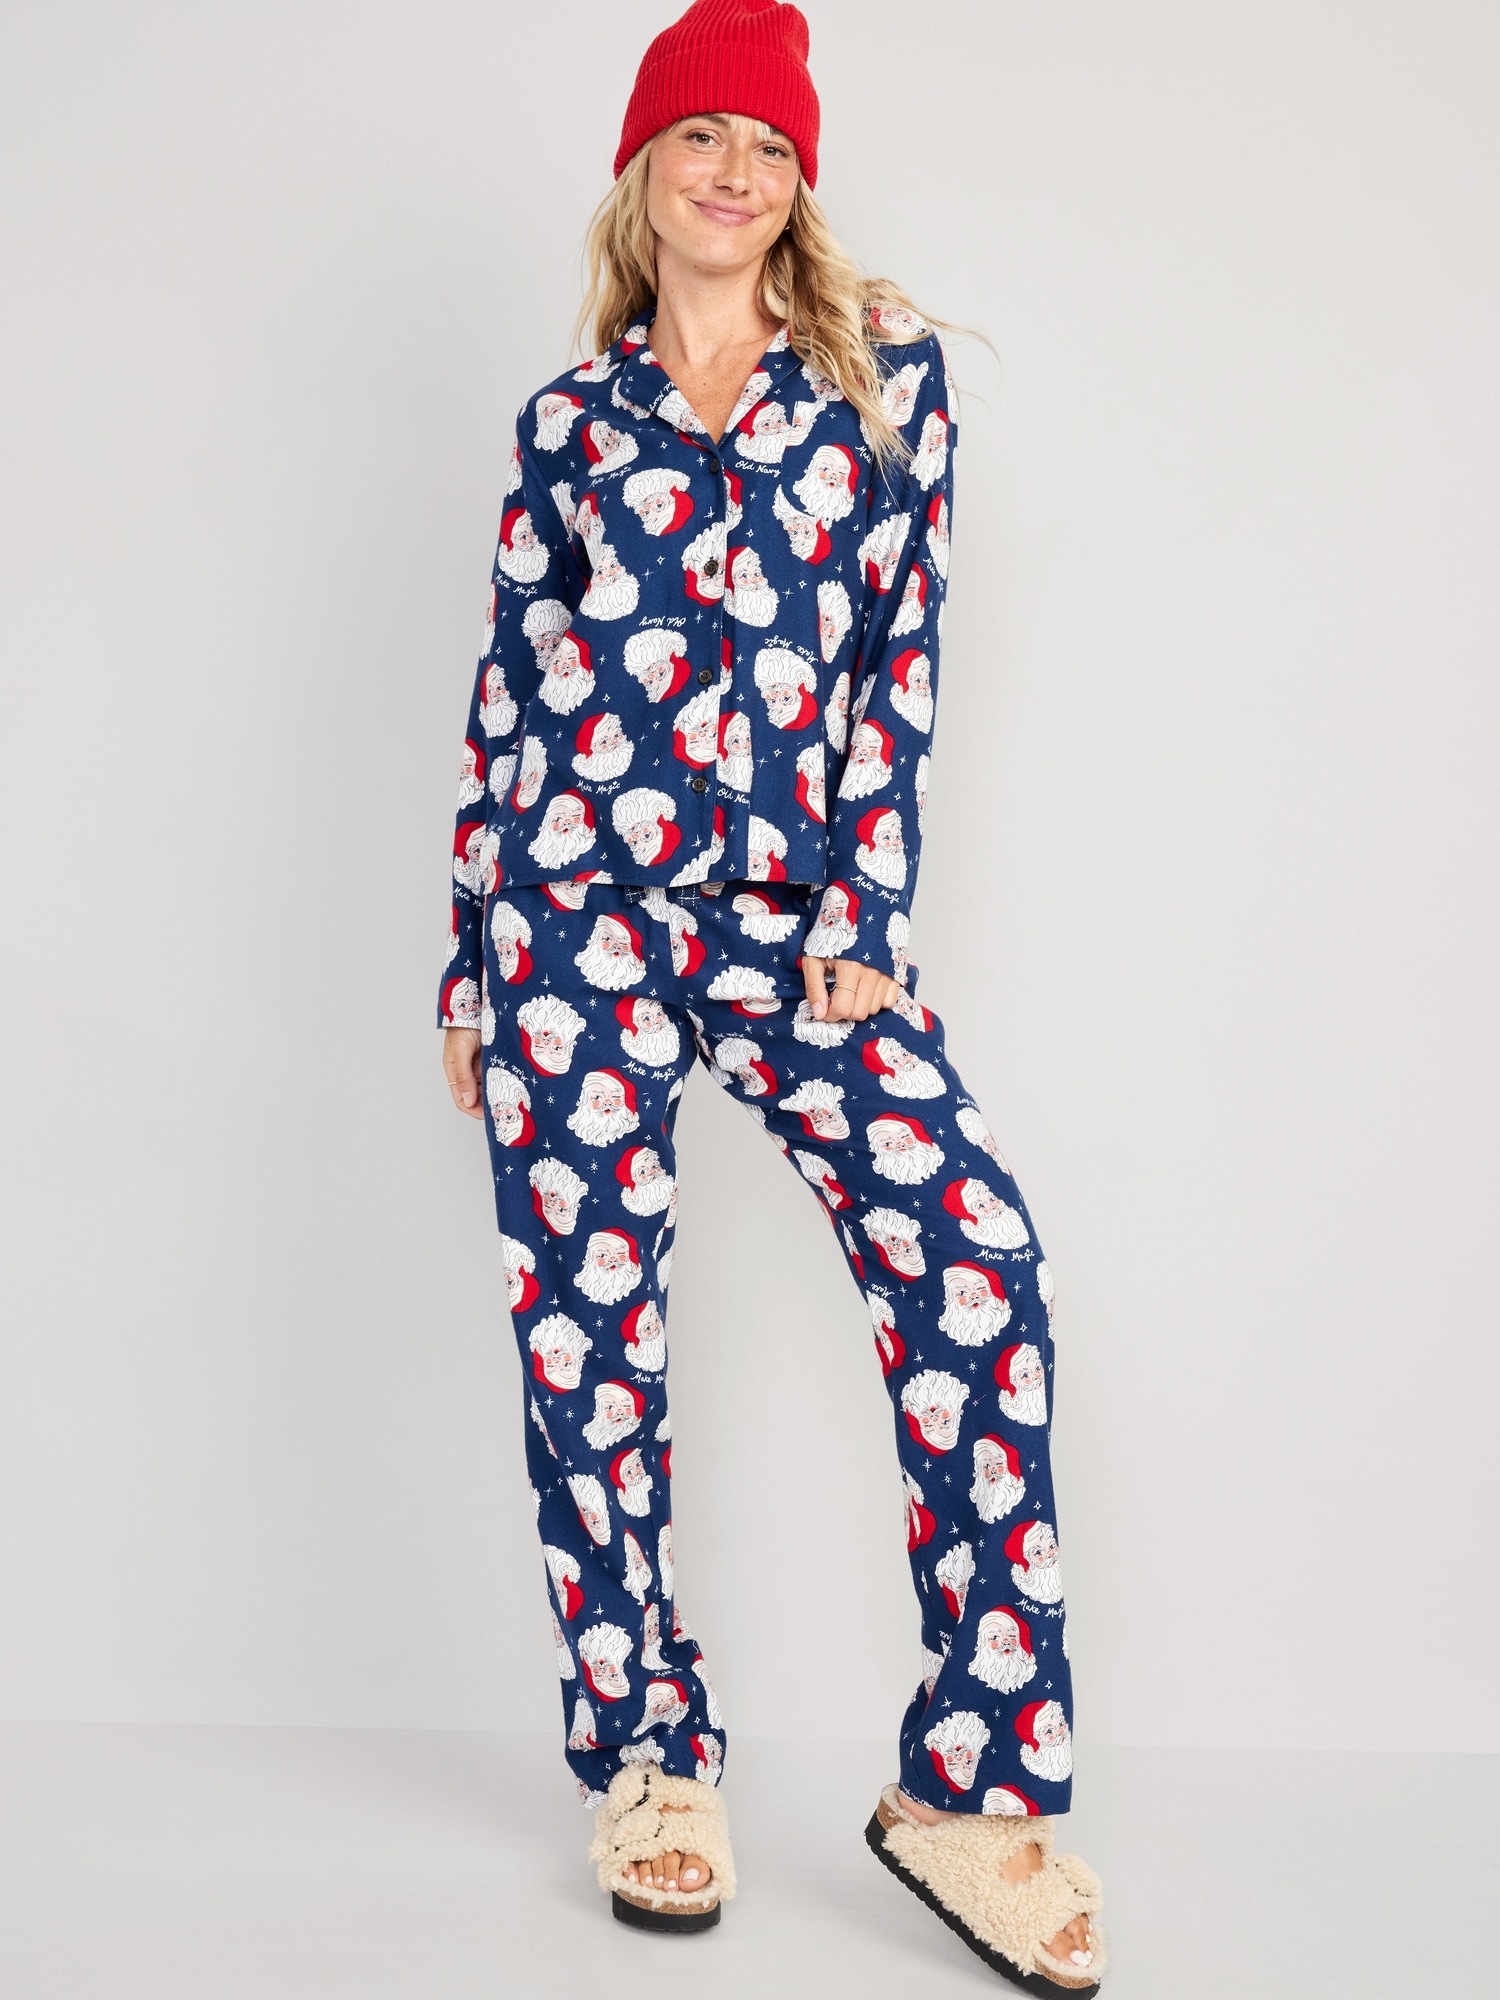 Trade your tired pajamas for stylish loungewear from Old Navy